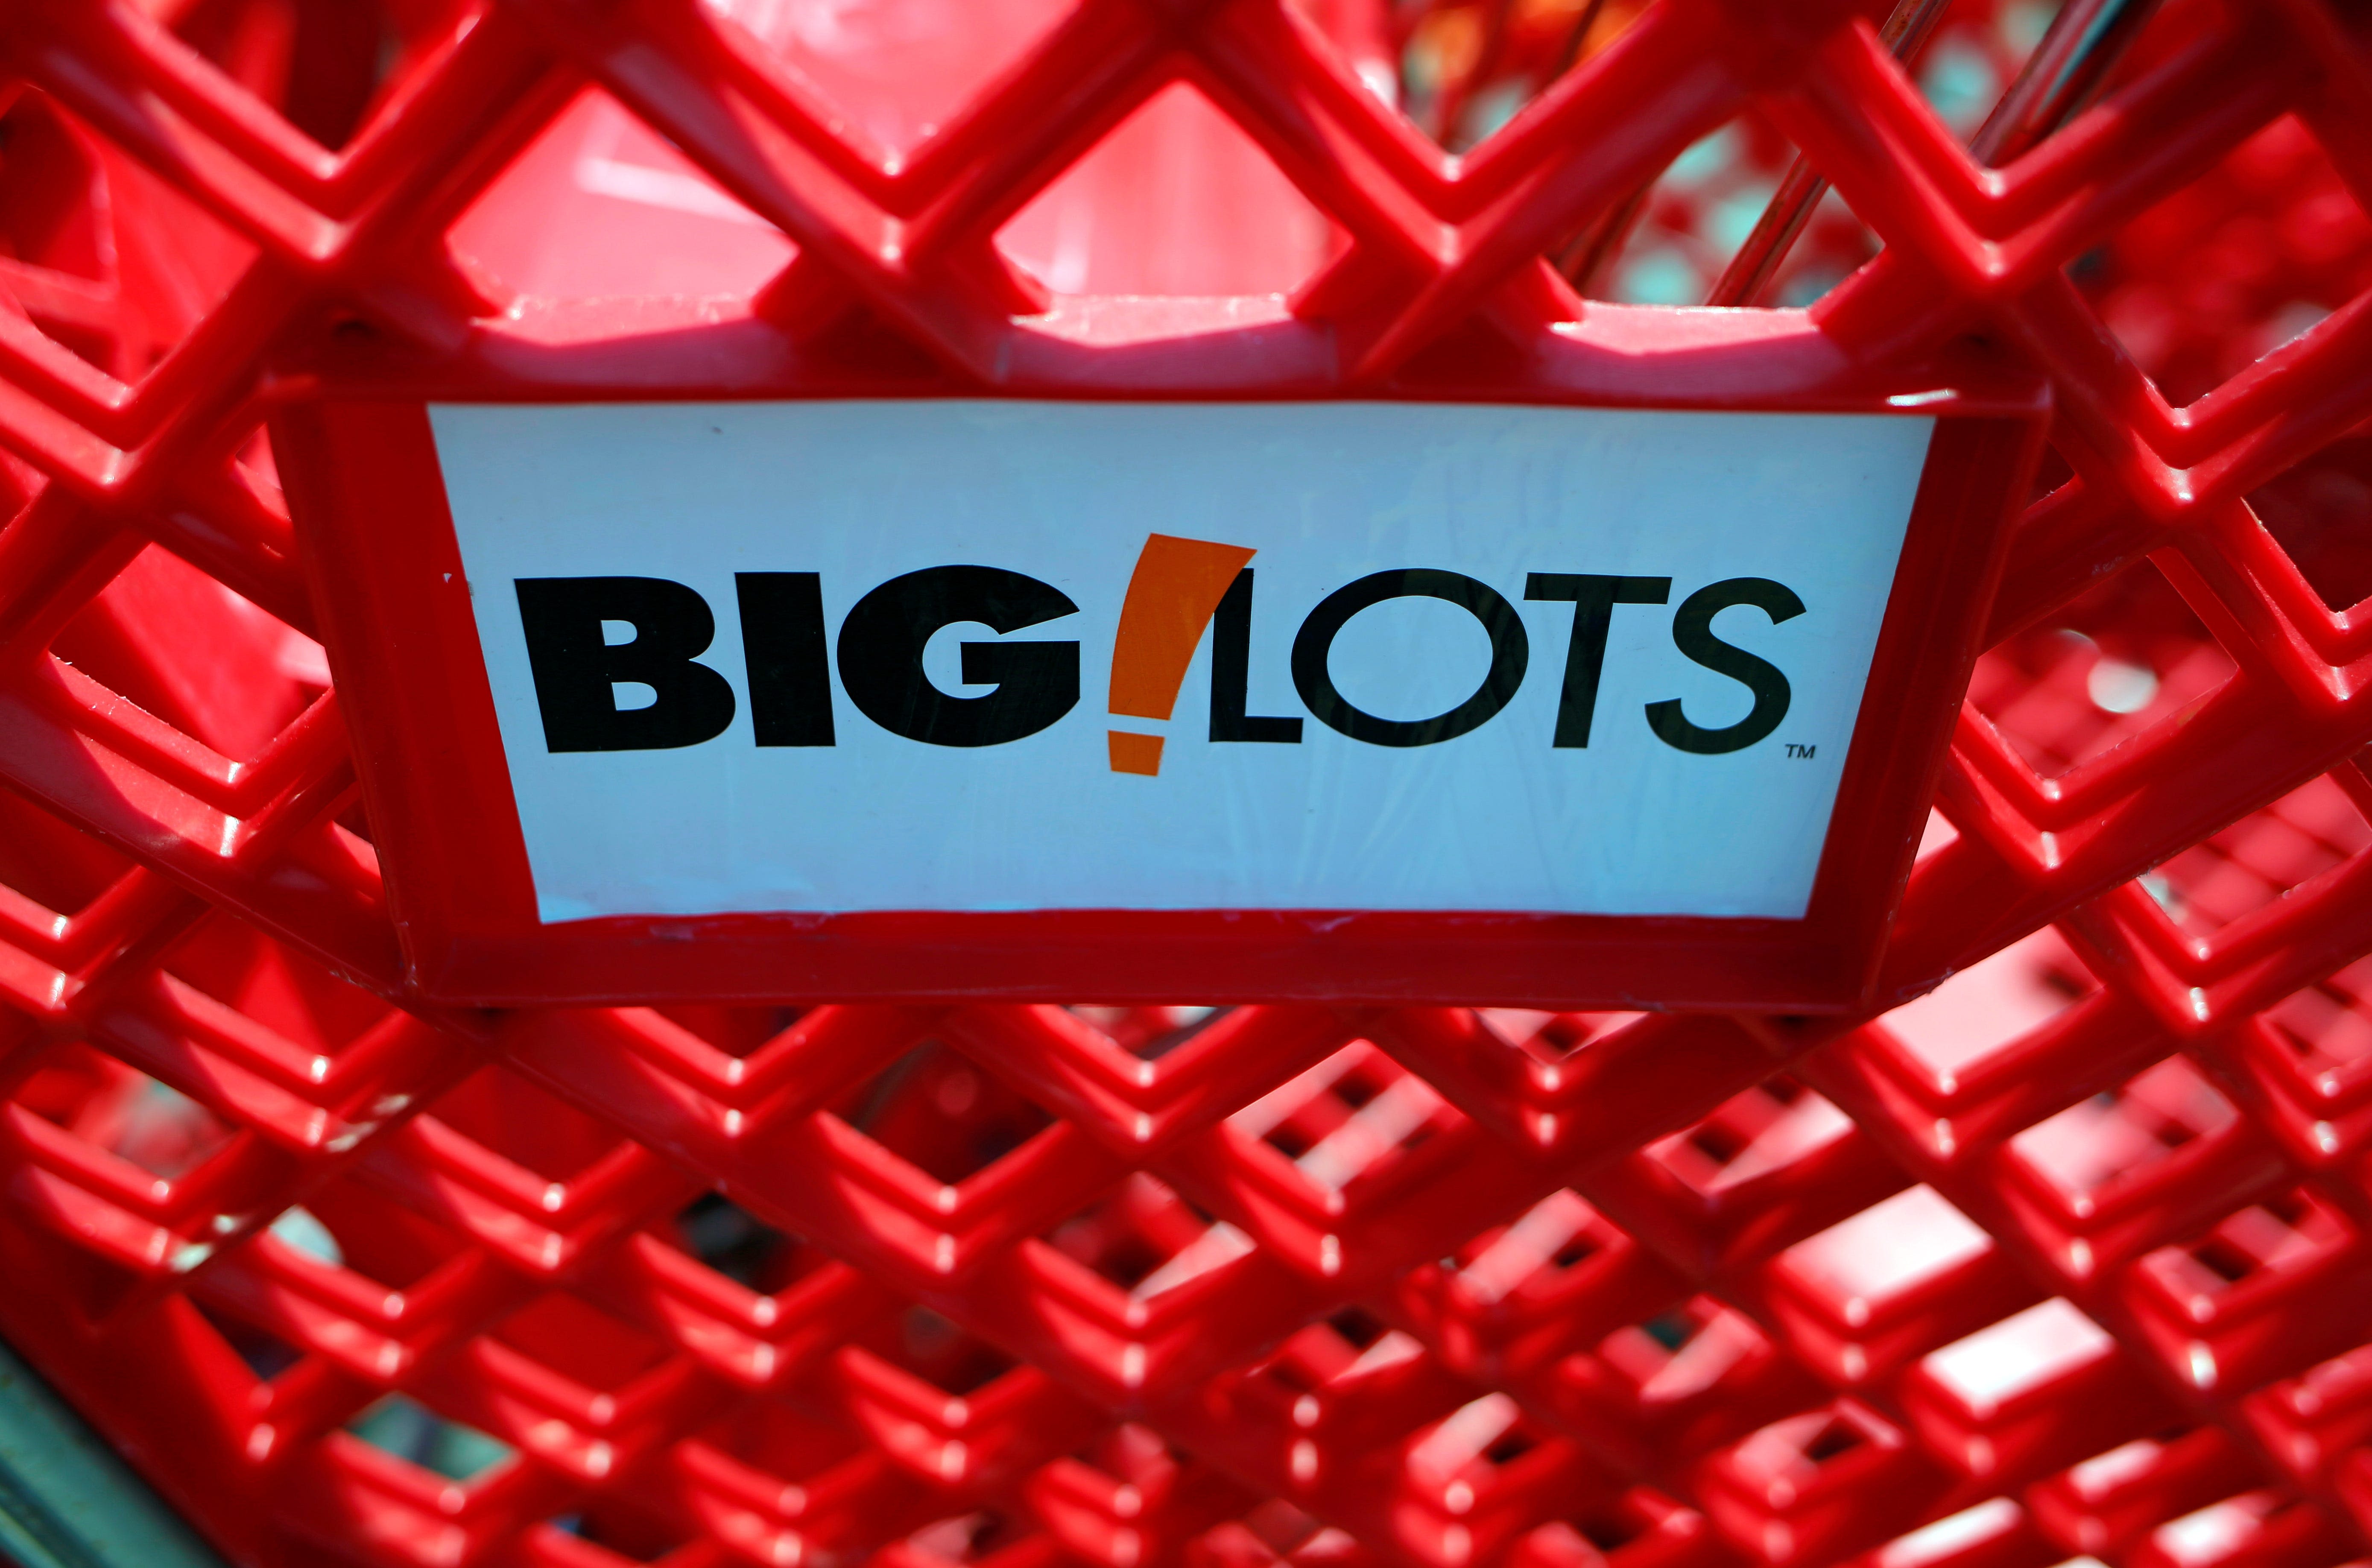 Big Lots will close up to 40 stores as it mulls bankruptcy. There are 5 Delaware locations